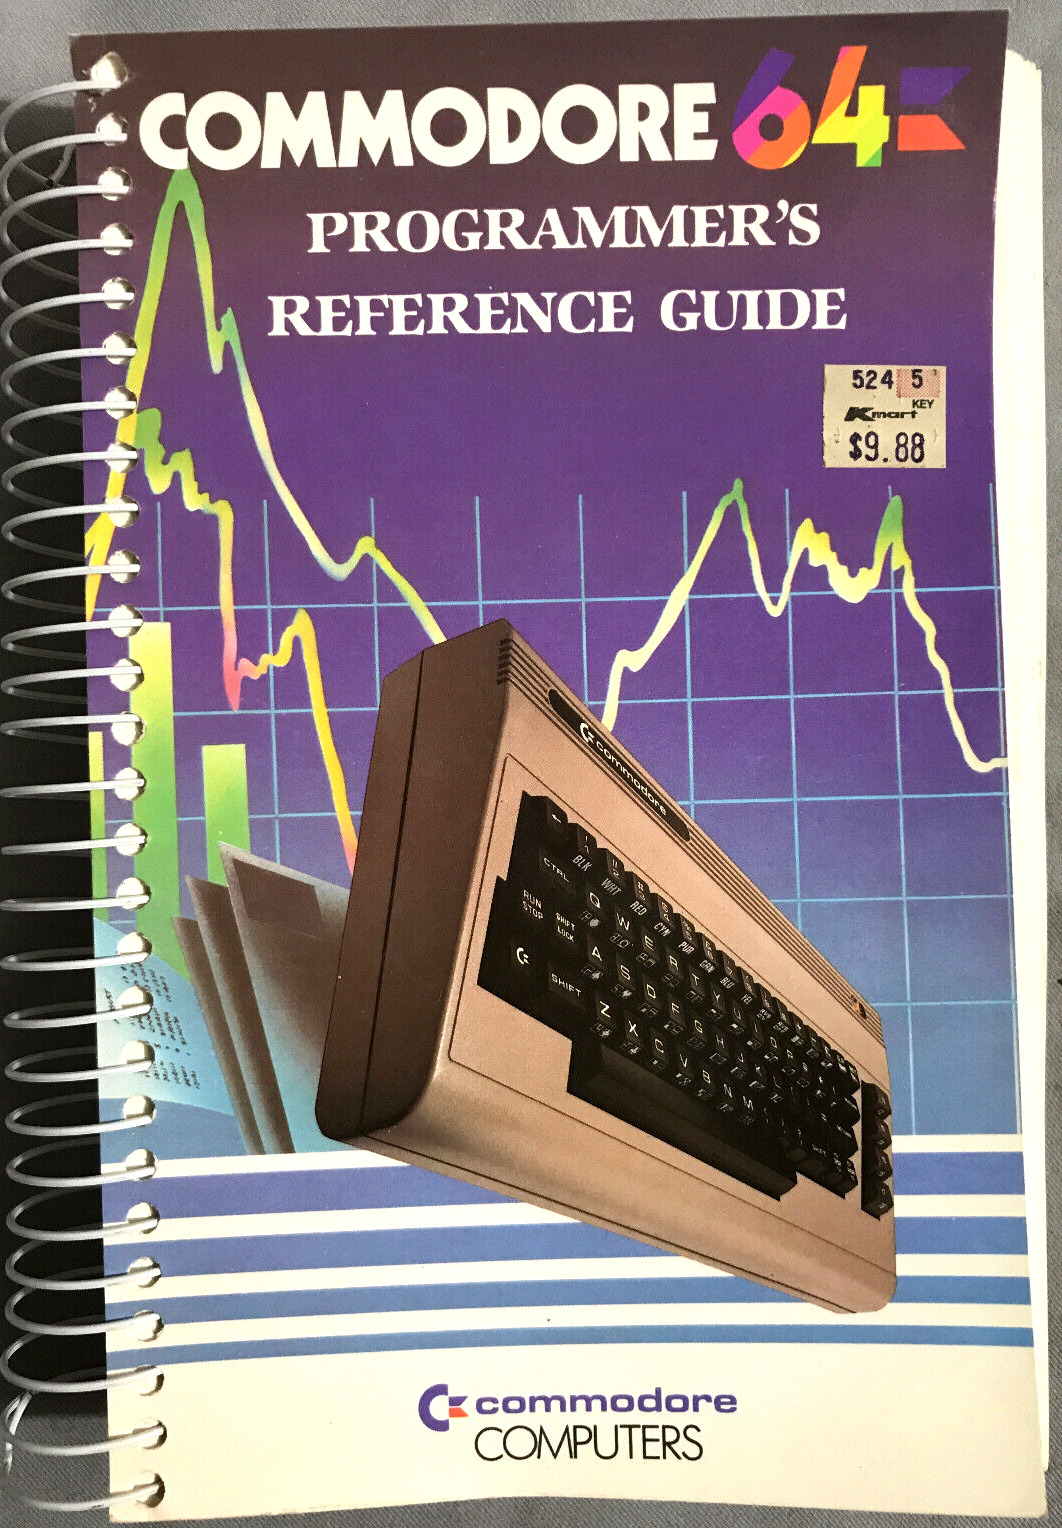 Fine Commodore 64 Programmers Reference Guide  Commodore Business Machines 1984